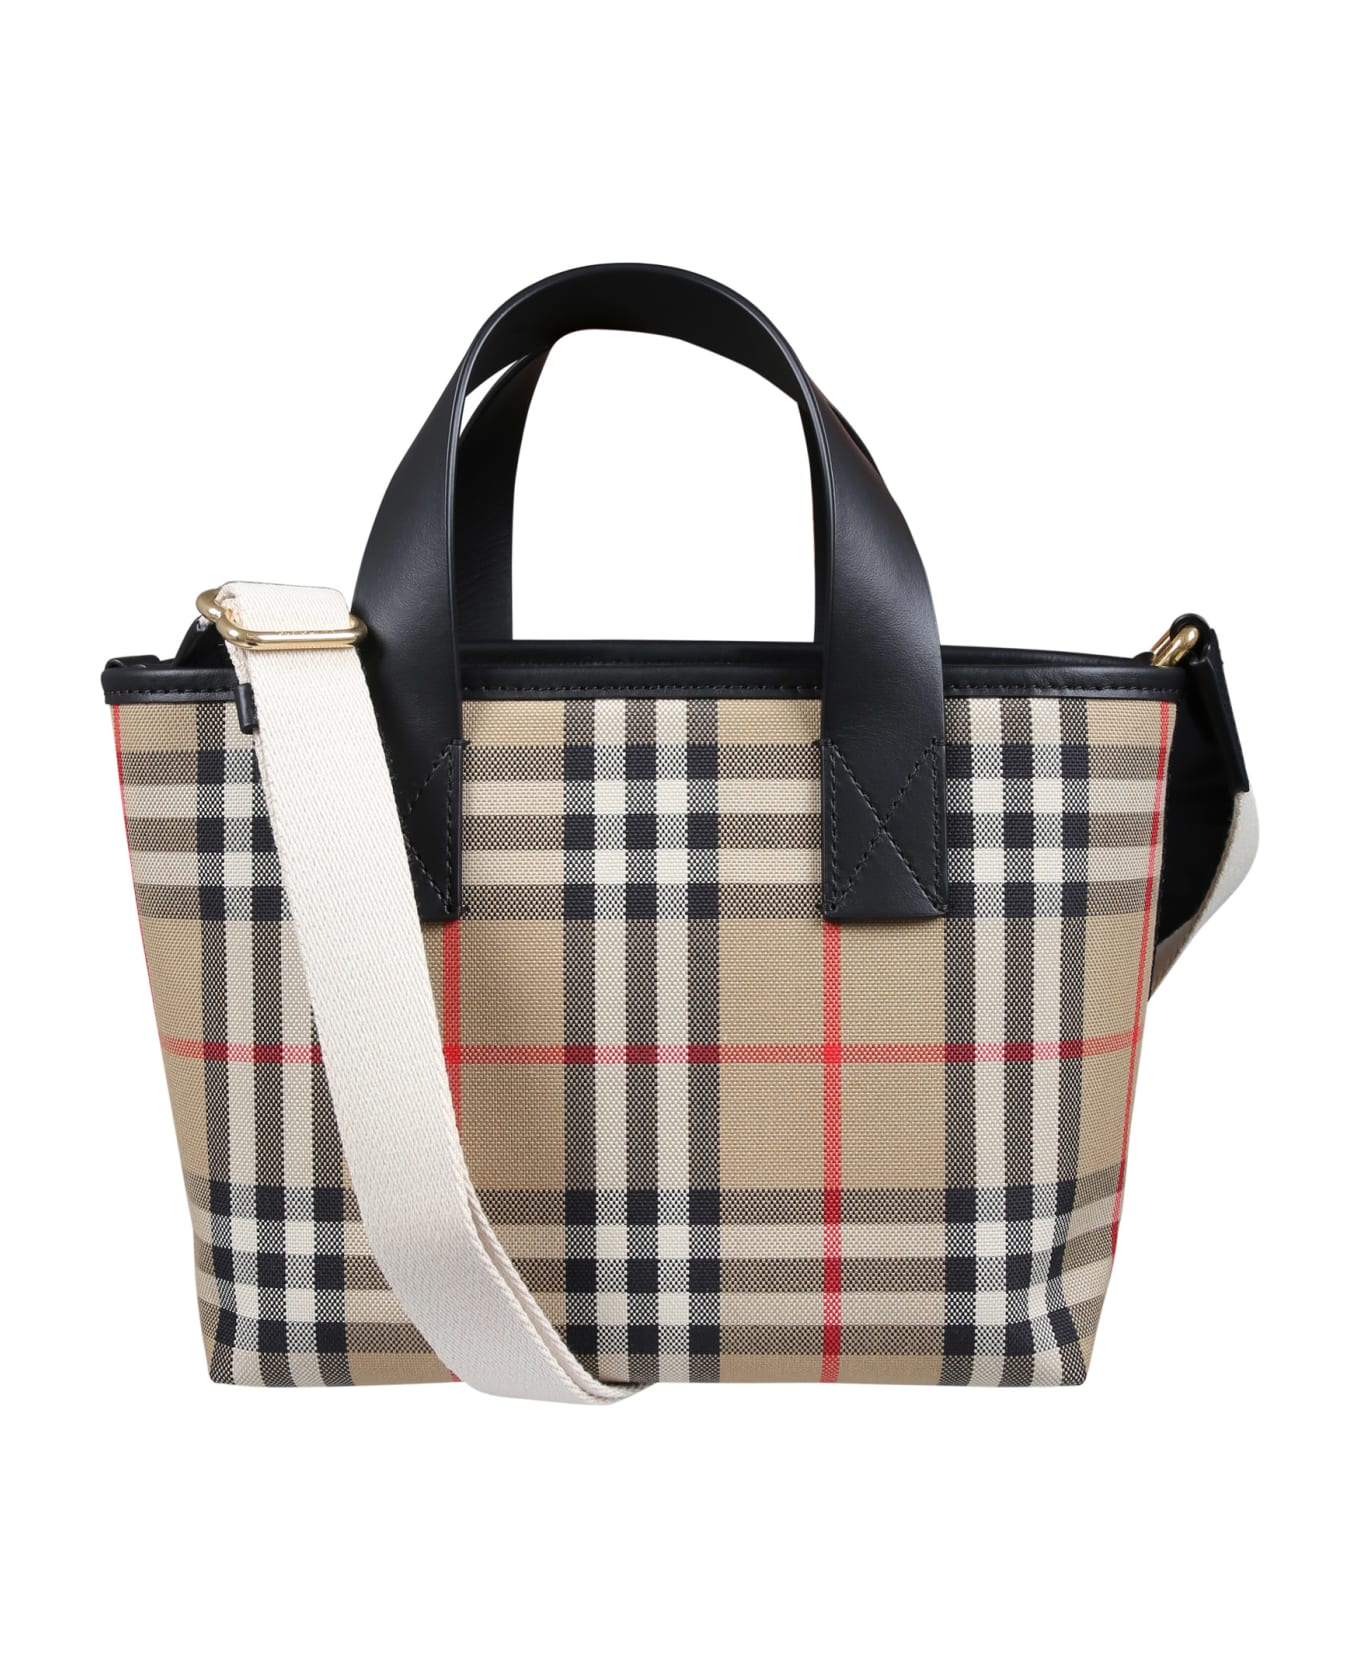 Burberry Beige Bag For Girl With Vintage Check - Beige アクセサリー＆ギフト